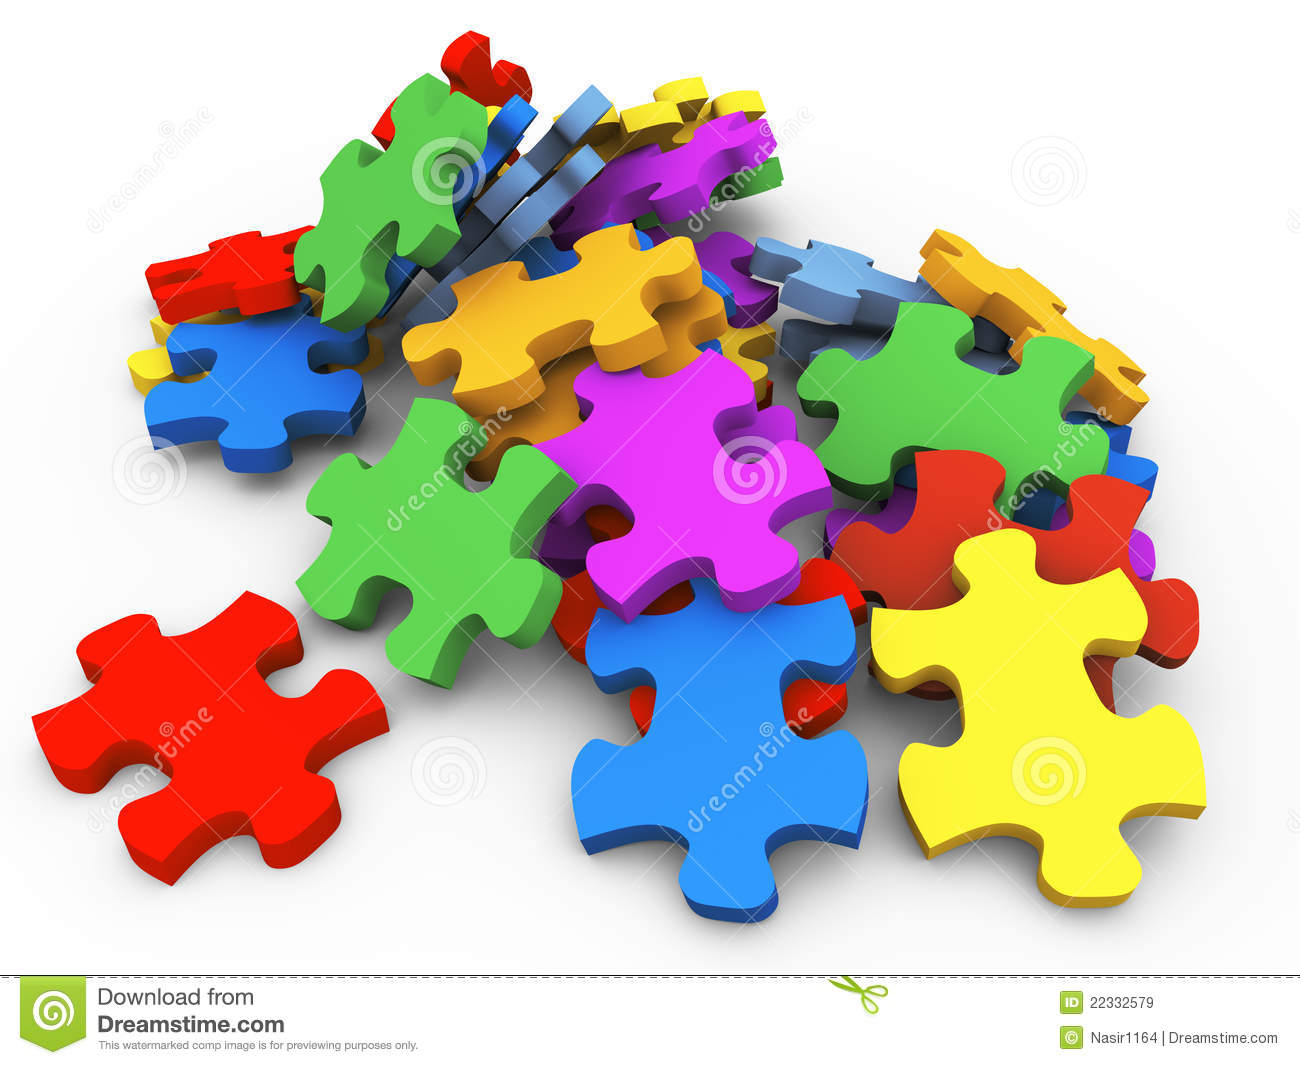 3d Heap Of Puzzle Pieces Royalty Free Stock Images.